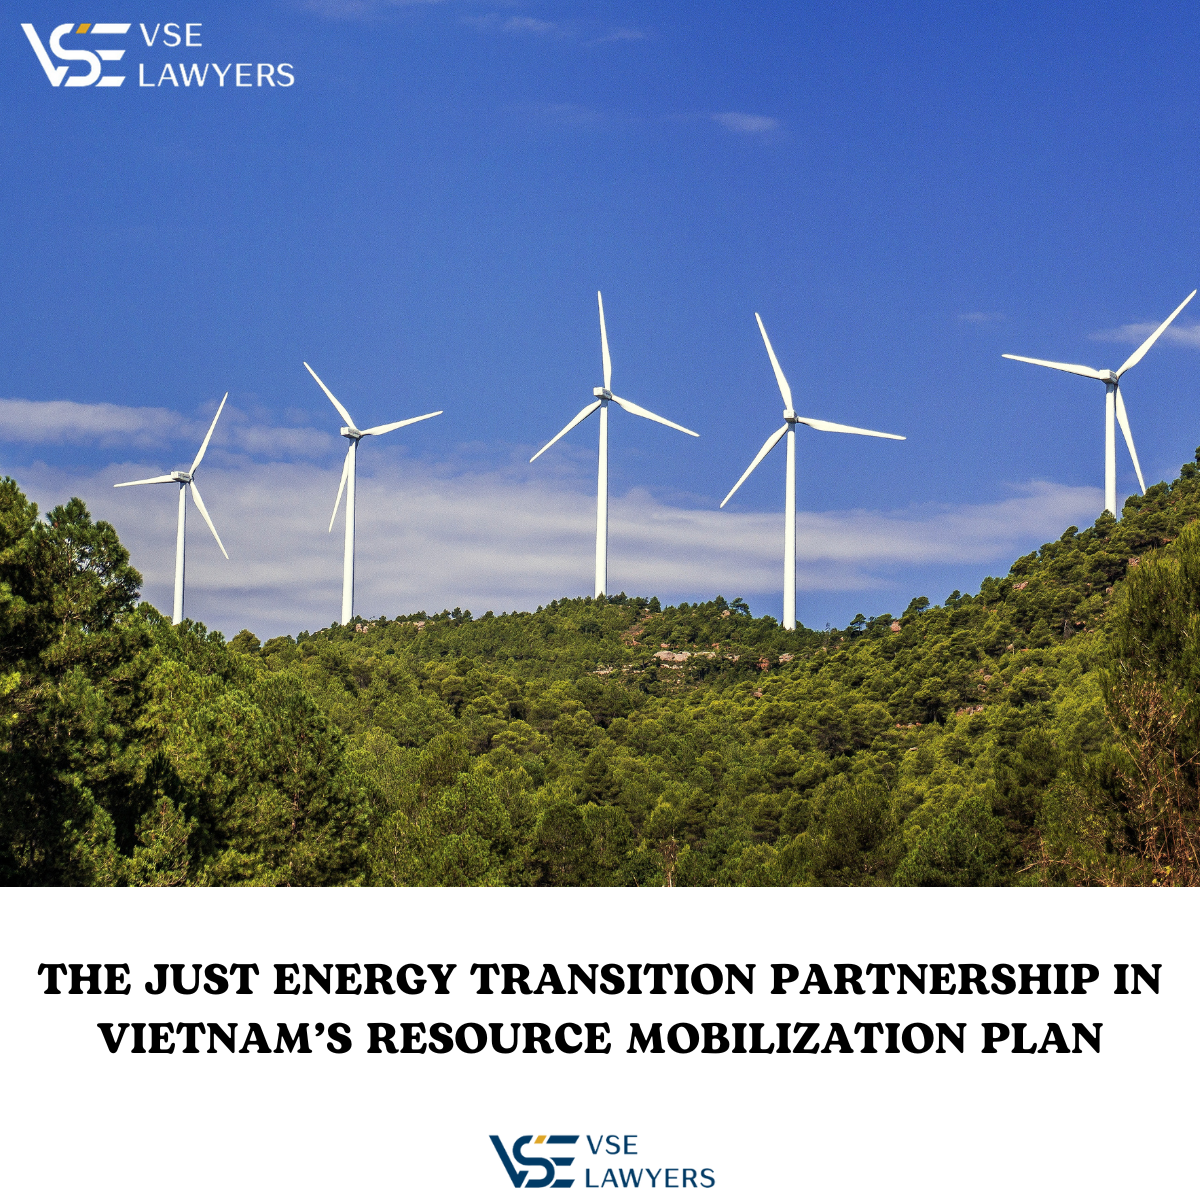 THE JUST ENERGY TRANSITION PARTNERSHIP IN VIETNAM’S RESOURCE MOBILIZATION PLAN